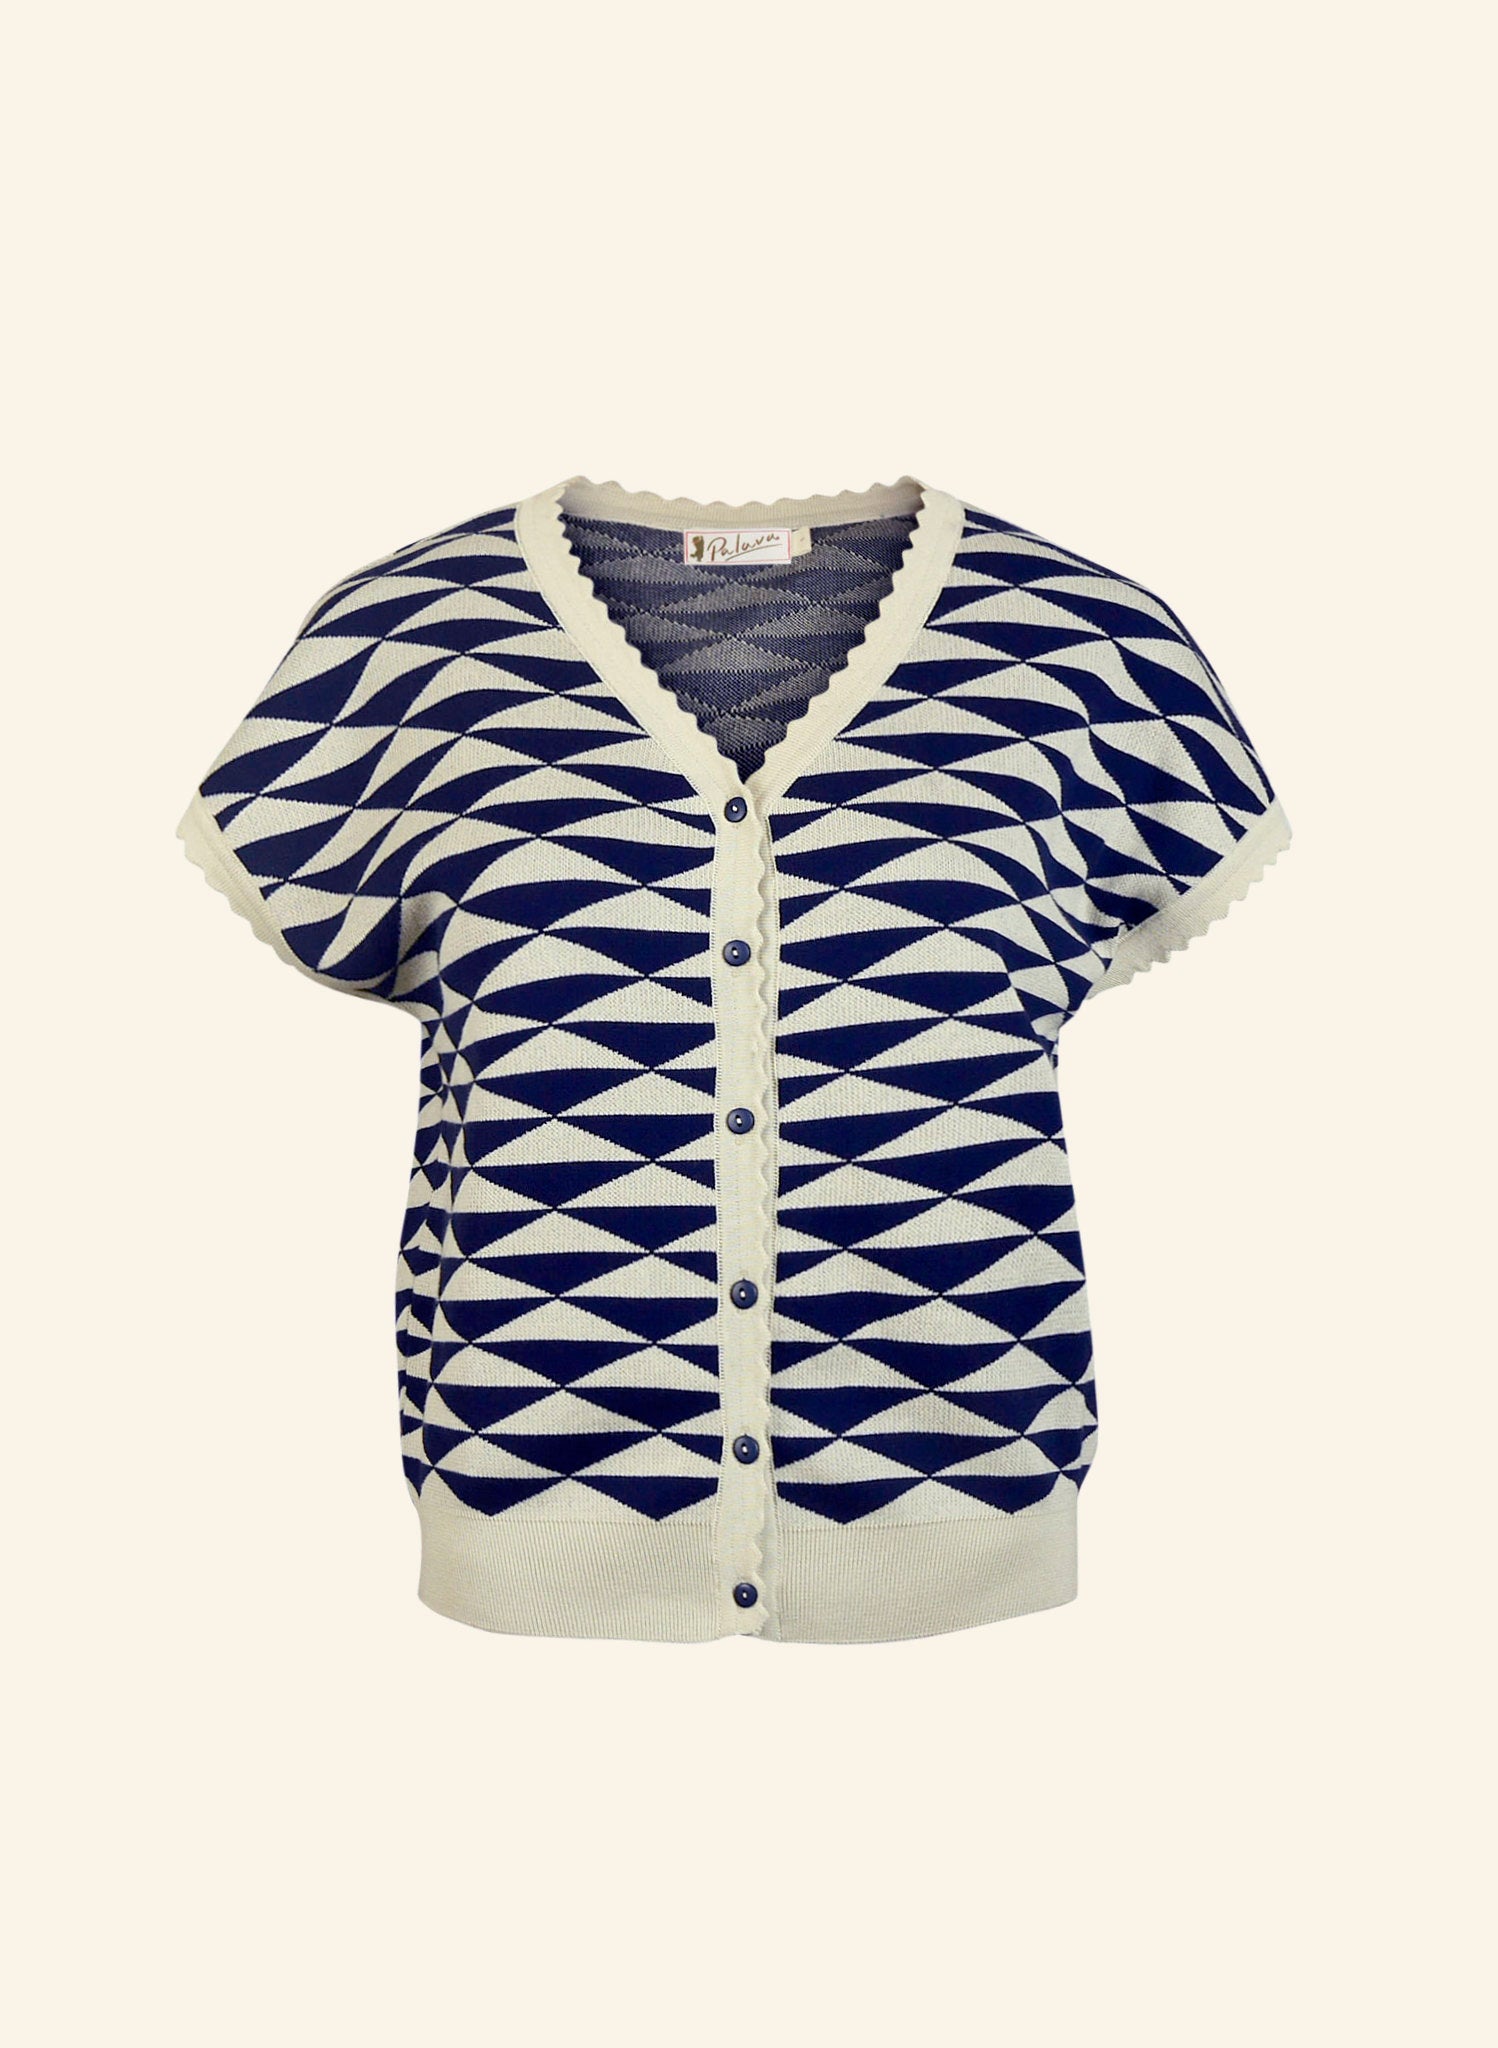 Emma - Navy Sails - Knitted Top